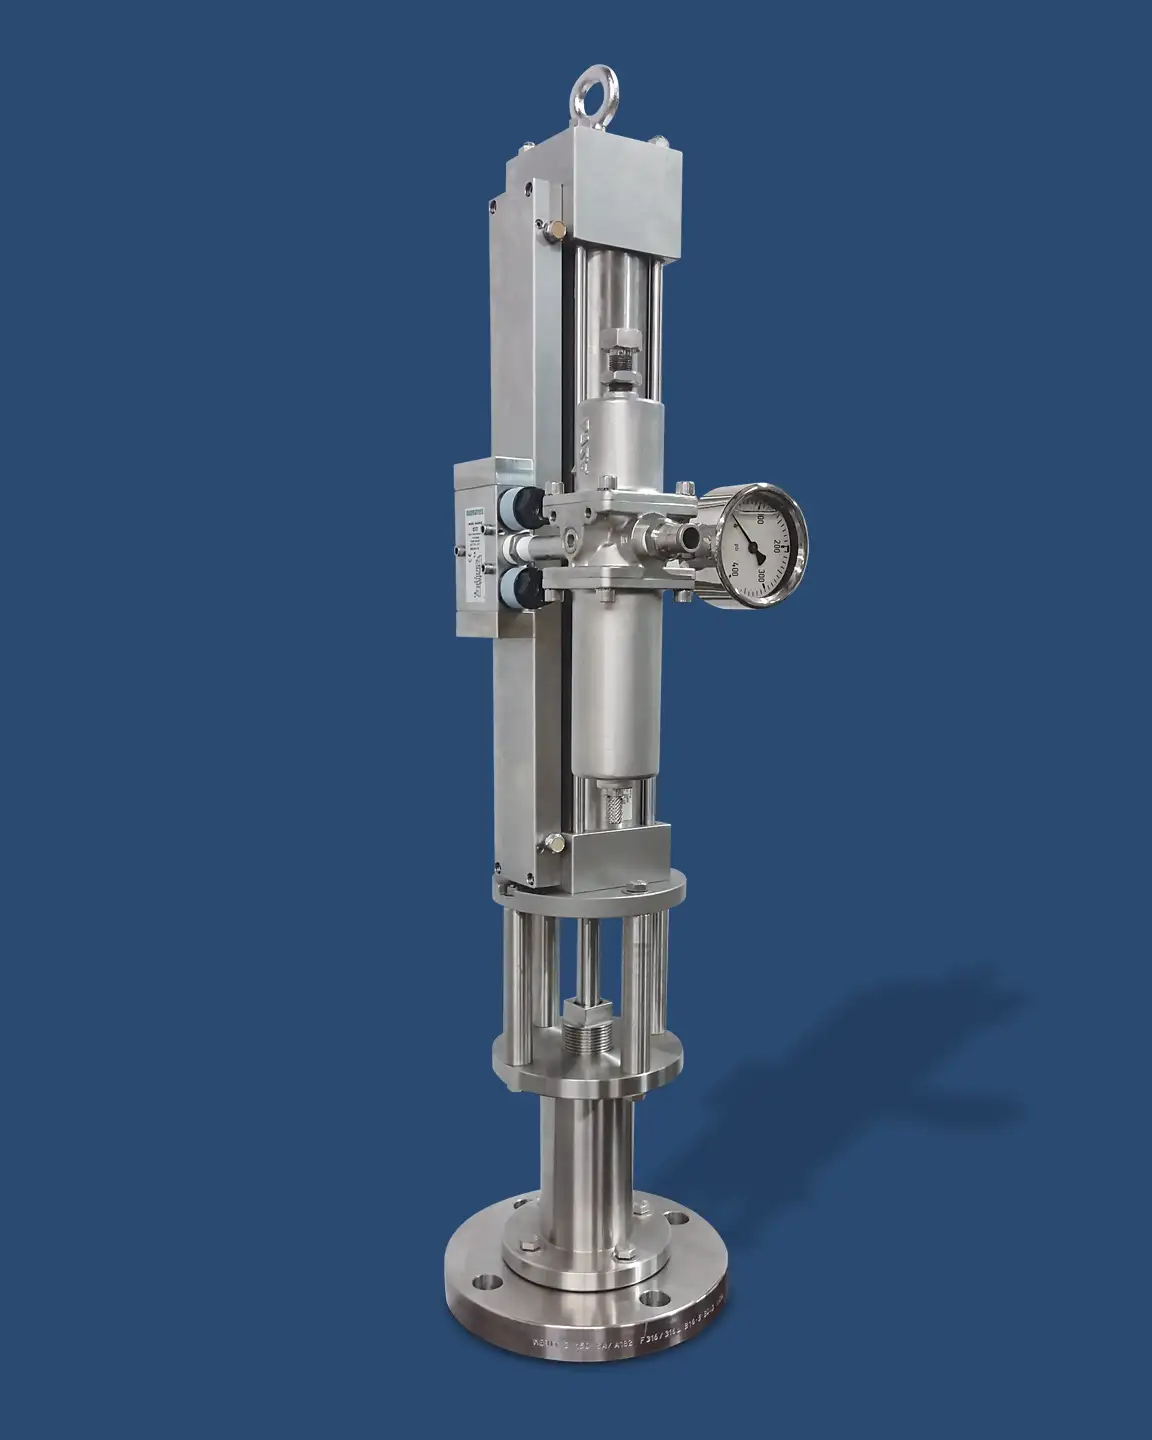 A vertical industrial machine with a robust metallic structure, featuring cylindrical components and a top-head drive pump, a gauge on the right side, and multiple small pipes and fittings. The base is a round metallic platform, set against a solid blue background.